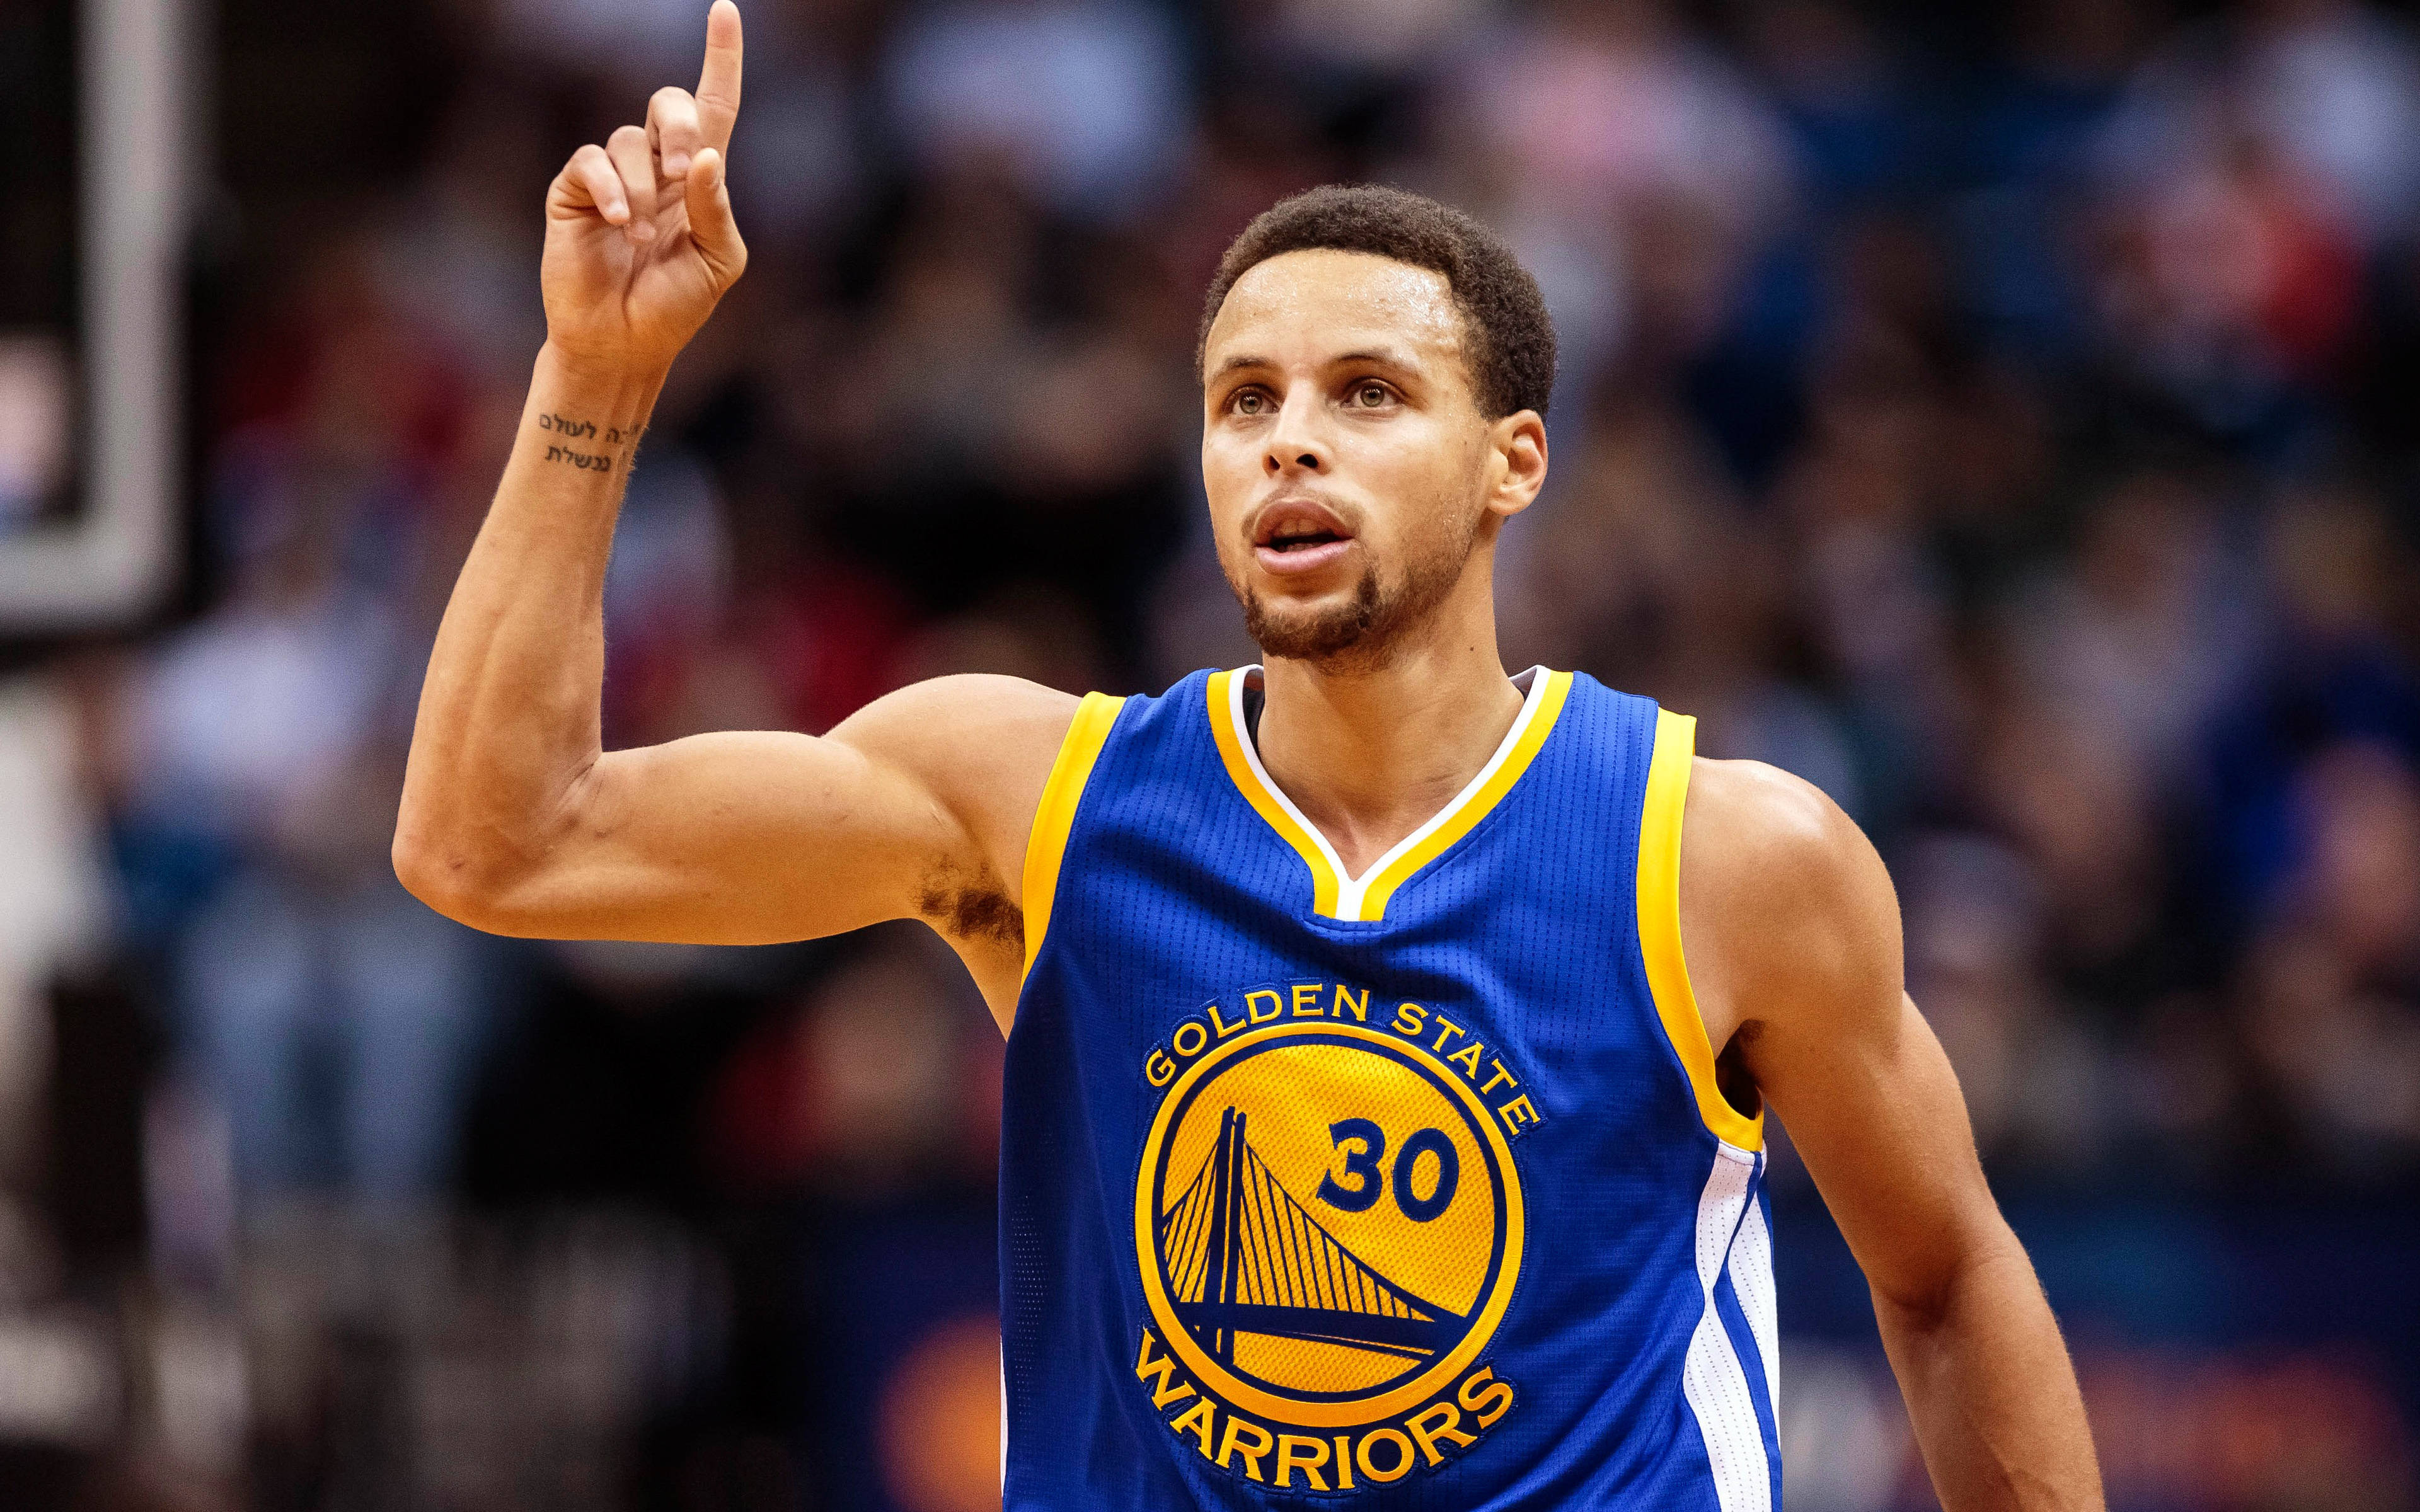 Download wallpapers 4k, Stephen Curry, basketball stars, NBA, Cleveland  Cavaliers